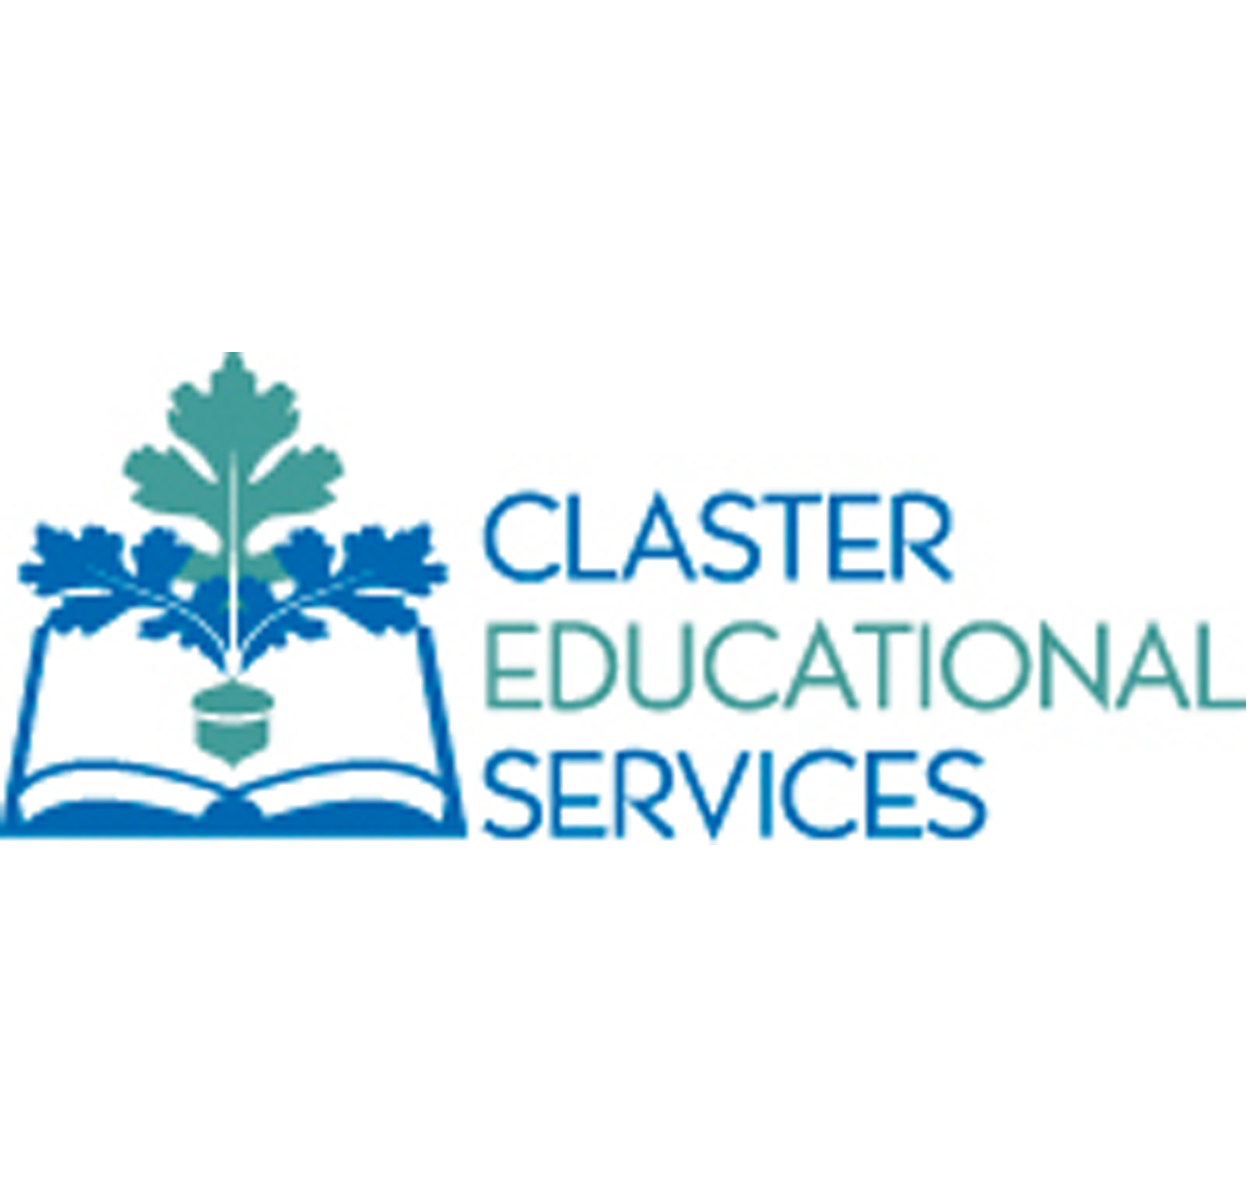 Claster Educational Services